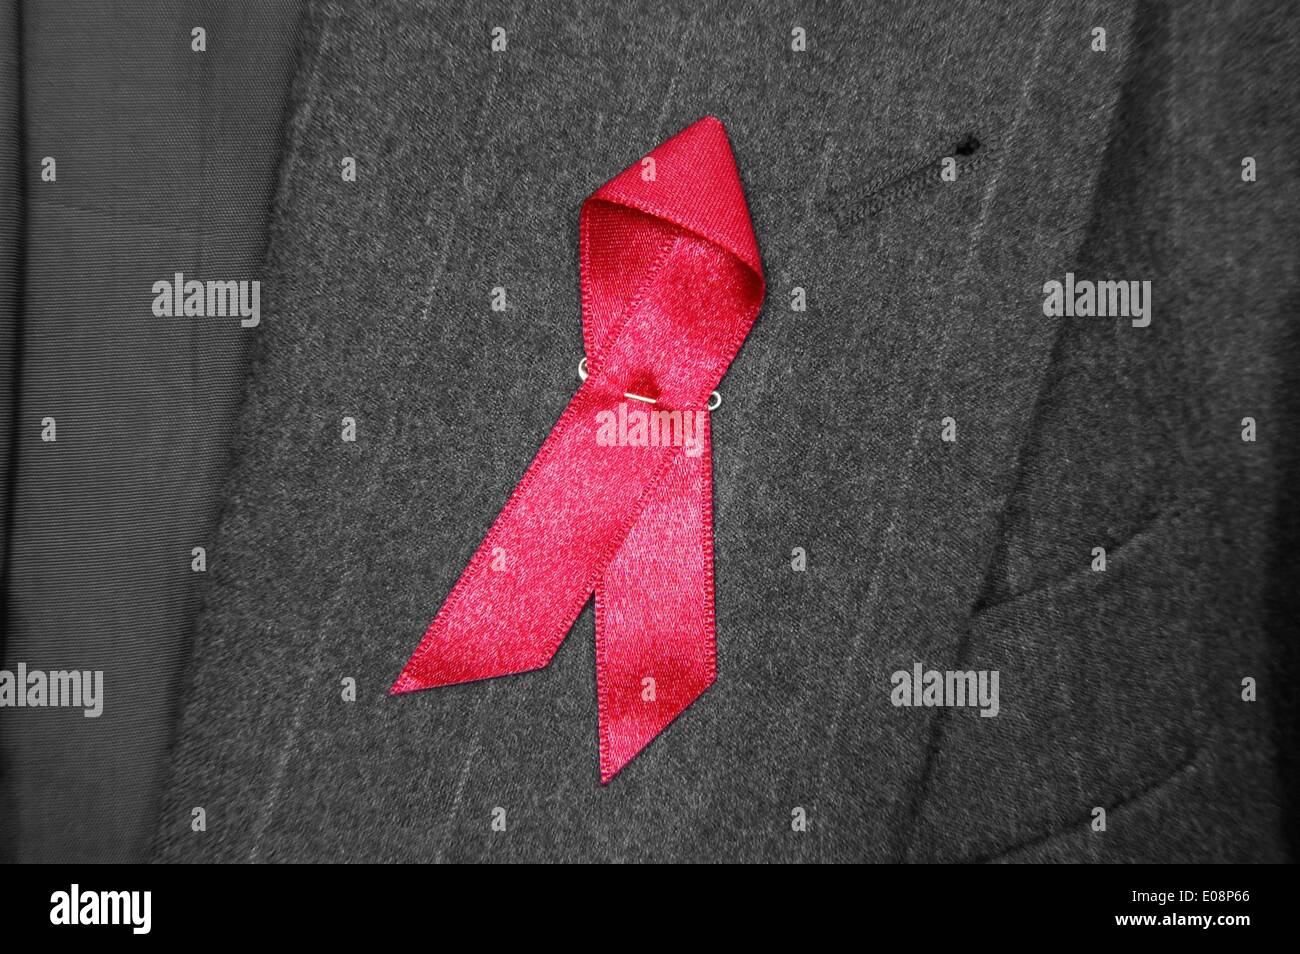 Illustration - A red ribbon is attached to a dark jacket in Germany, 06 January 2006. Fotoarchiv für ZeitgeschichteS. Steinach - NO WIRE SERVICE Stock Photo